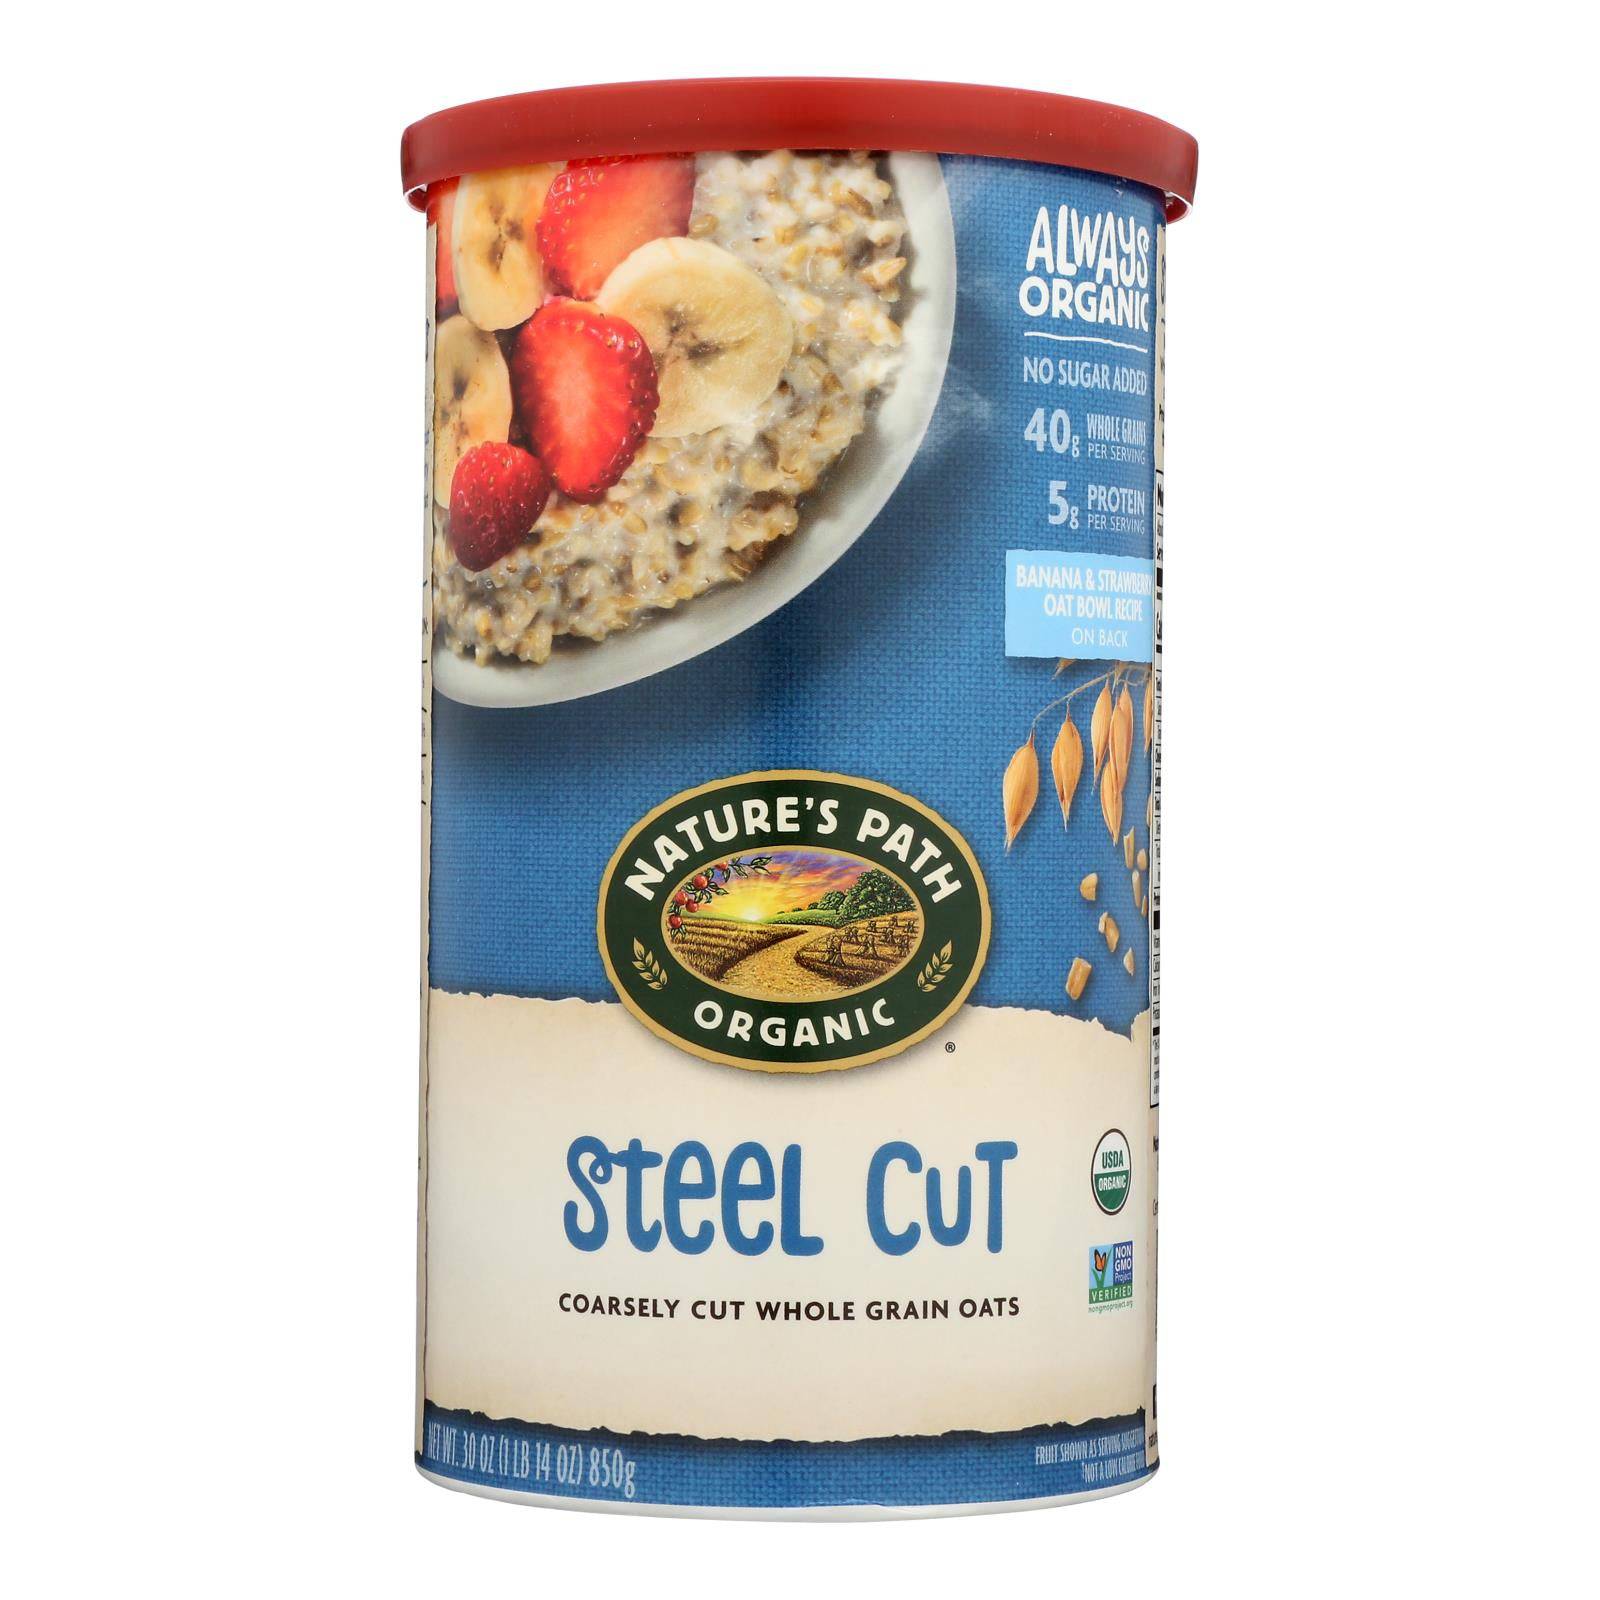 Buy Nature's Path Organic Steel Cut Oats - Case Of 6 - 30 Oz.  at OnlyNaturals.us